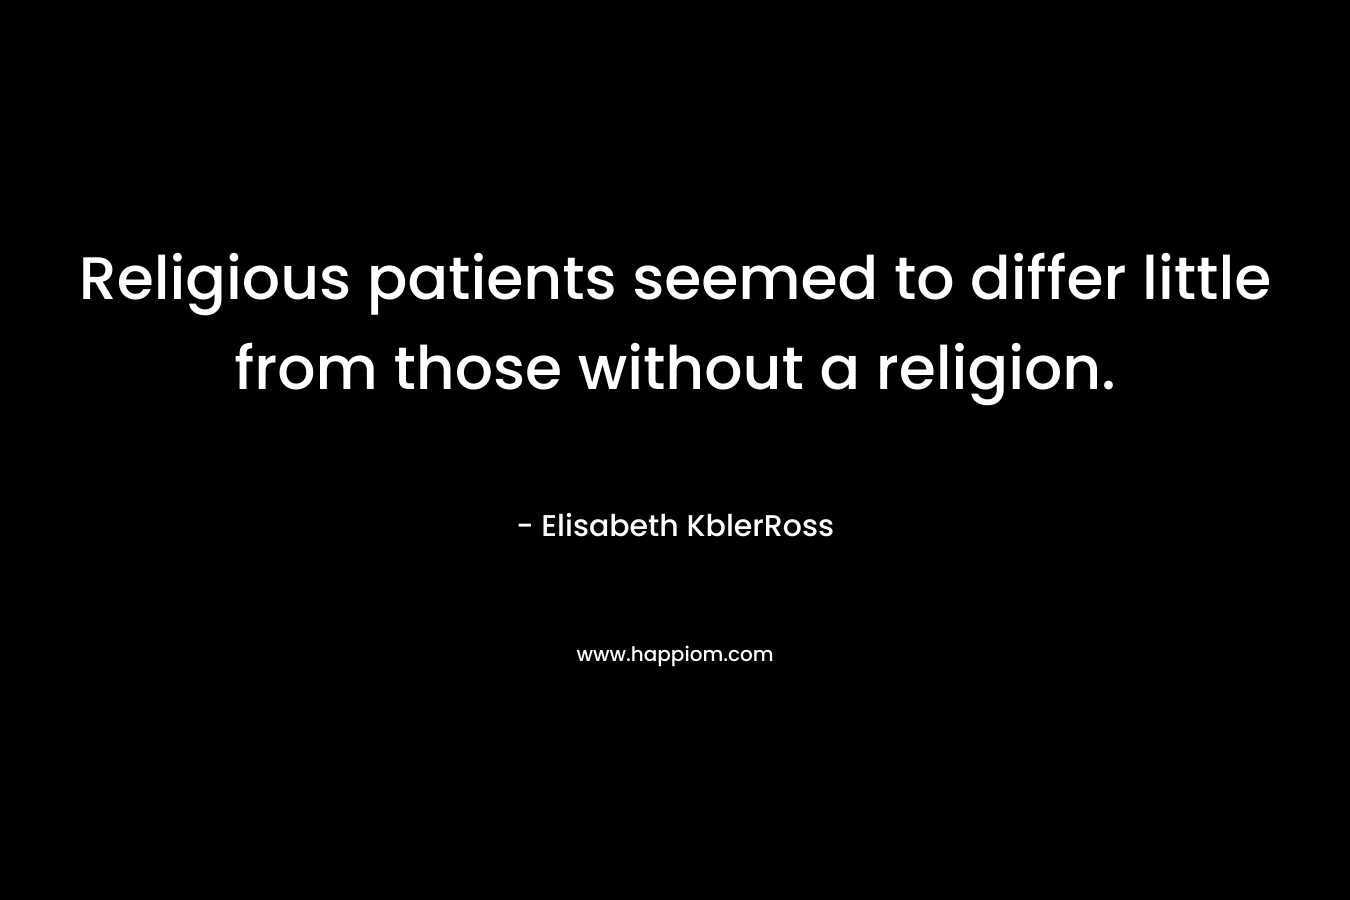 Religious patients seemed to differ little from those without a religion.